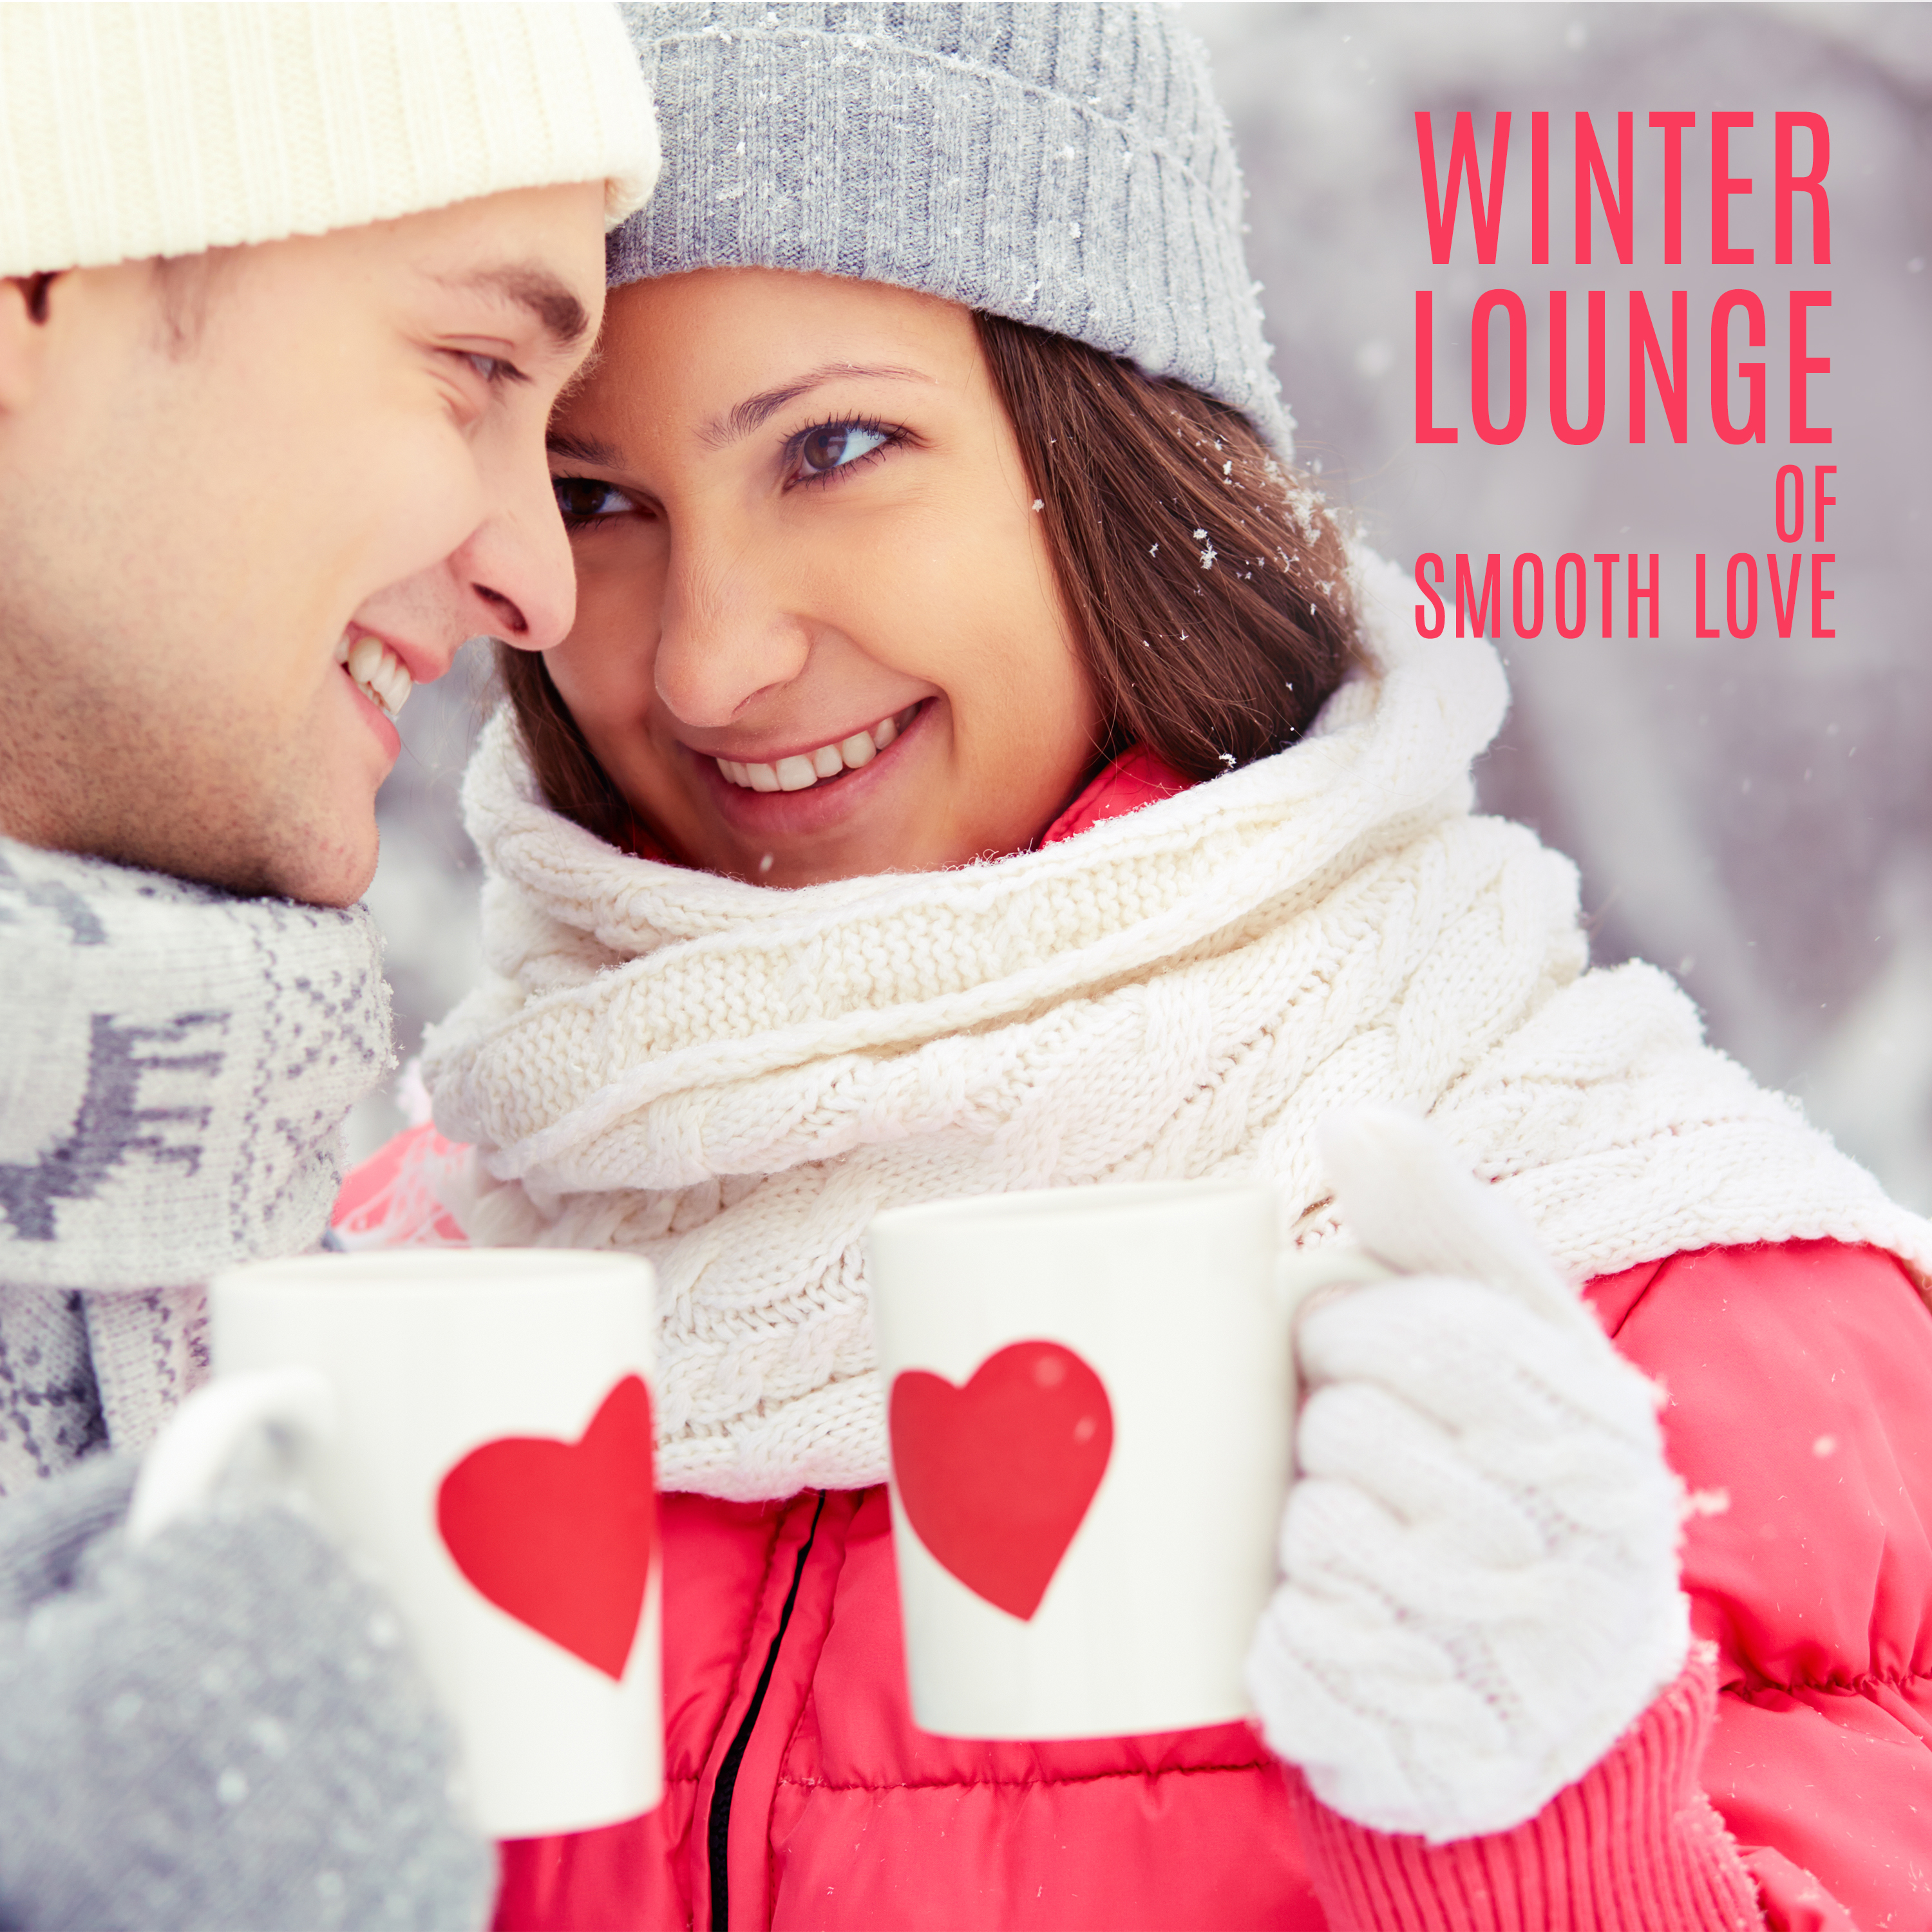 Winter Lounge of Smooth Love (Proposal at Restaurant, Midnight Cocktails, Romantic Moon, Christmas Kiss)